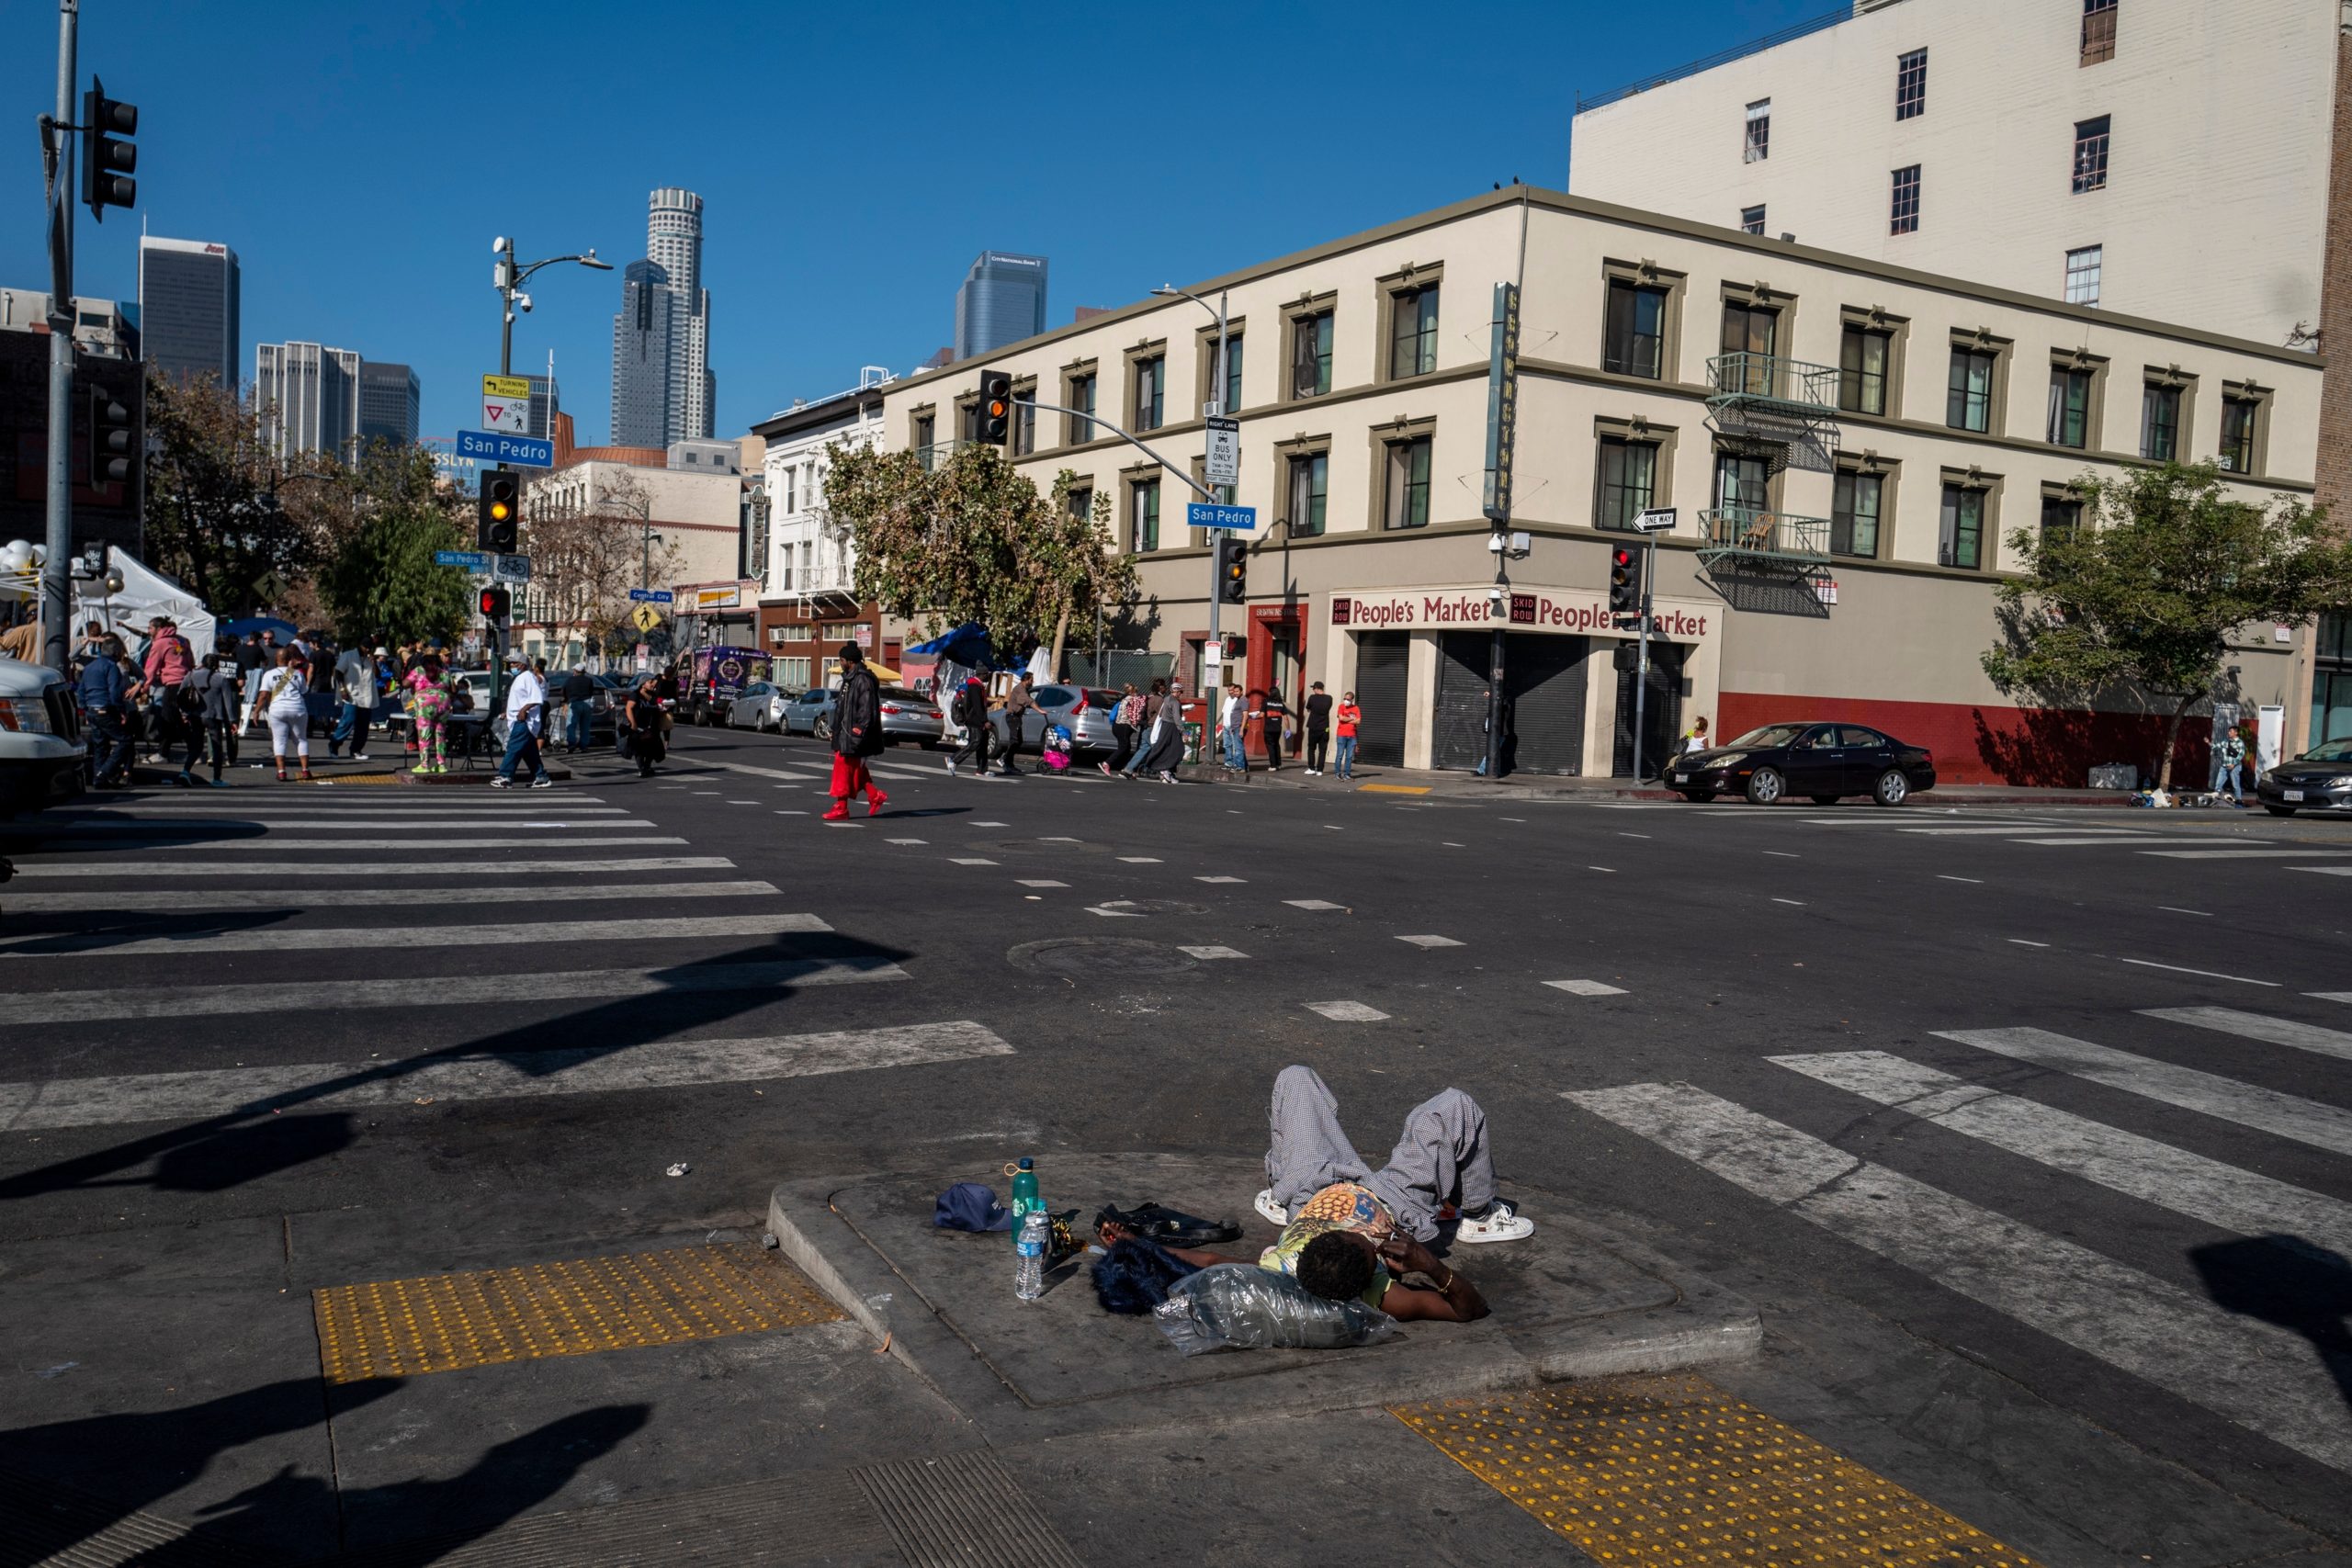 Robert Brennan: A sign from above on Skid Row